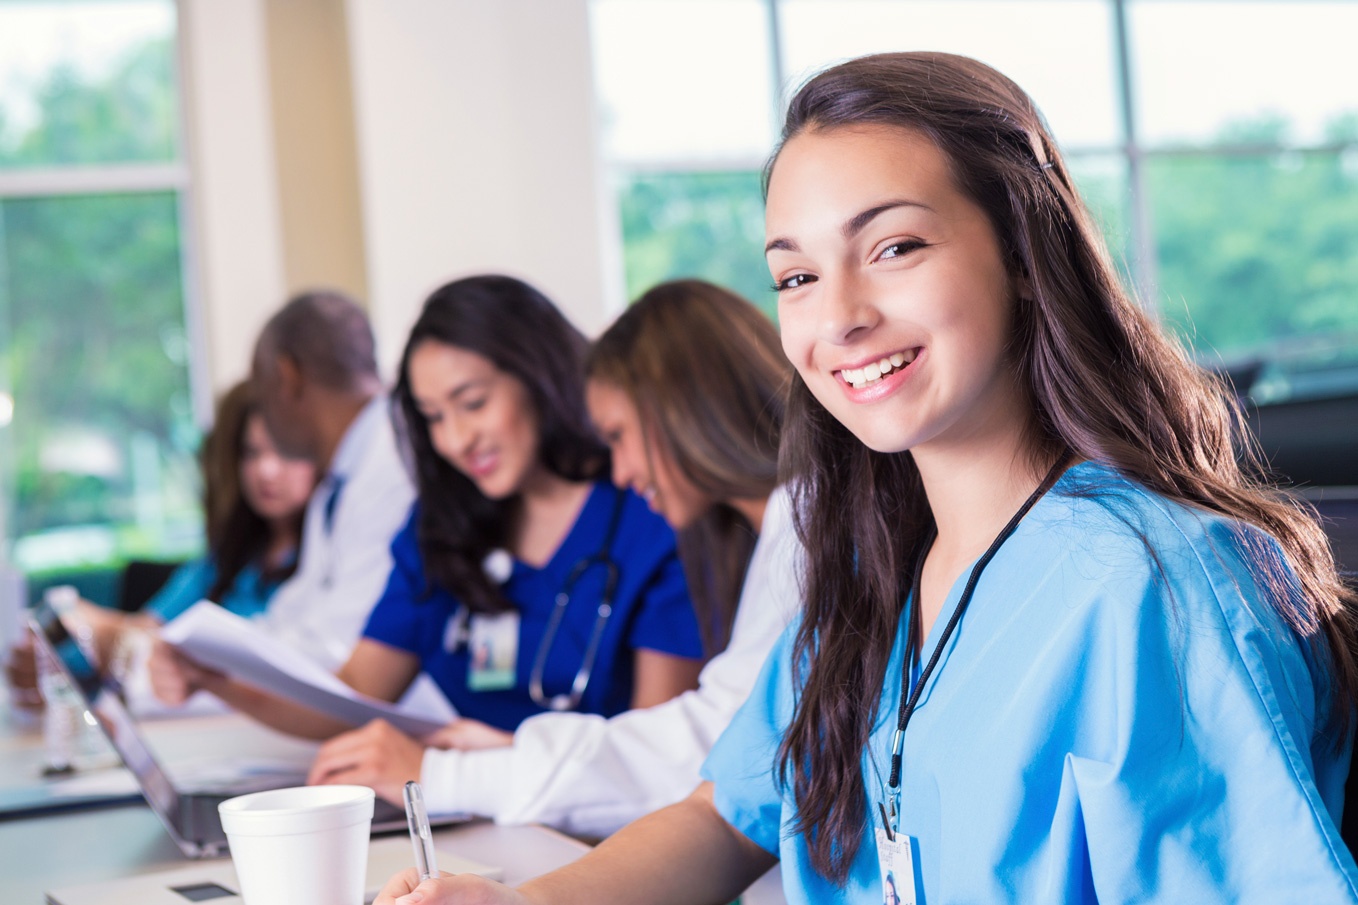 Why Should You Become a Registered Nurse?